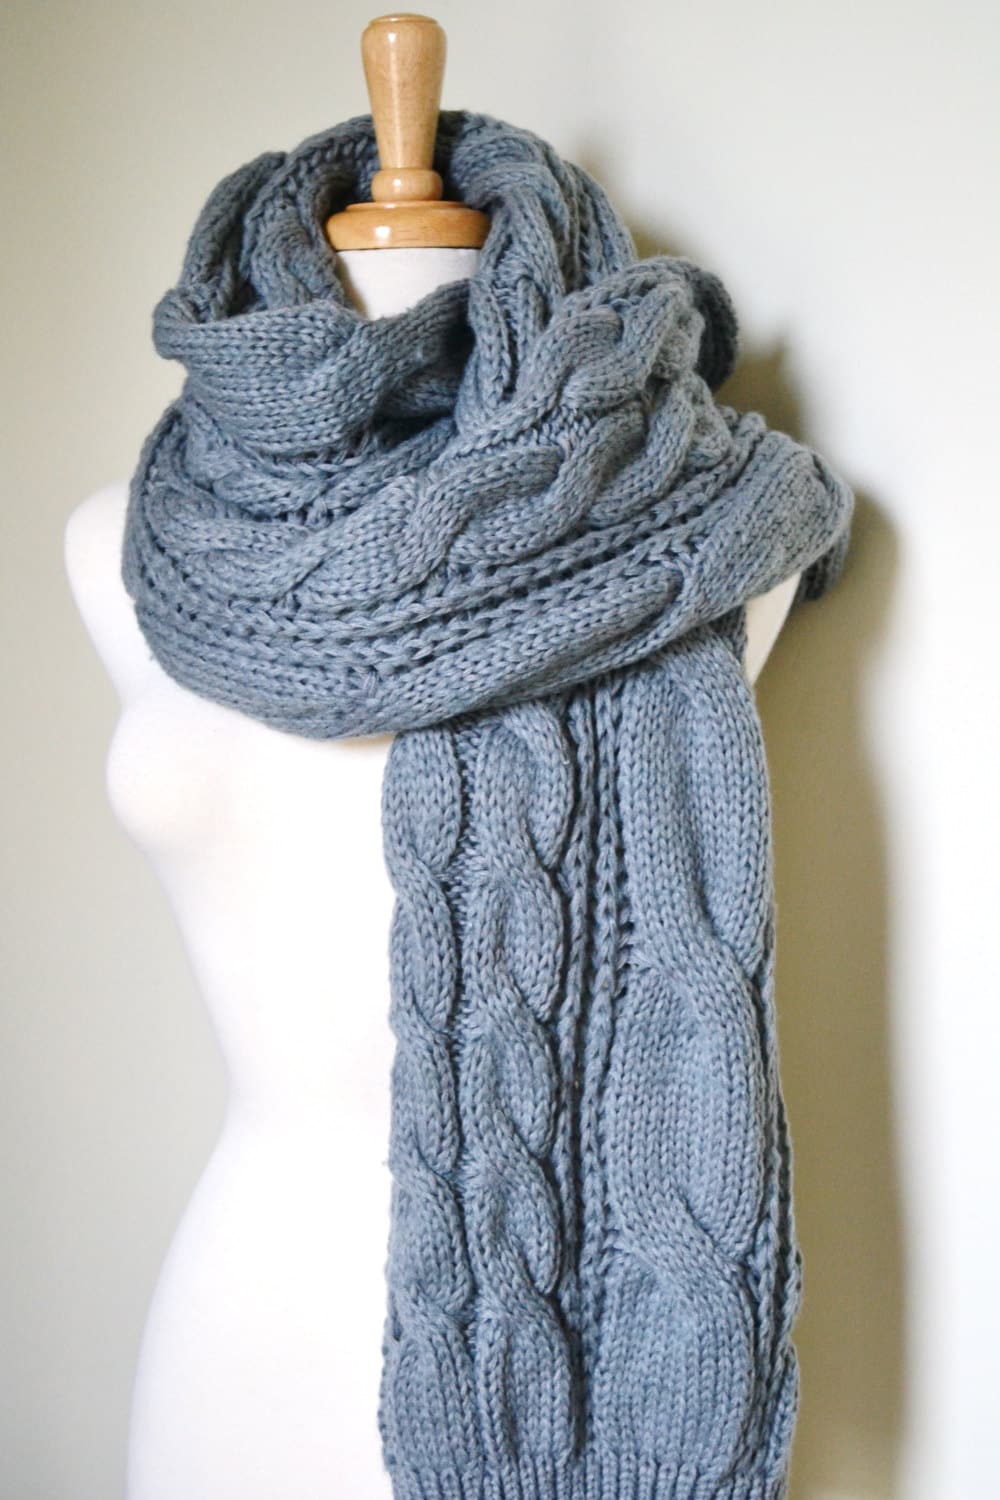 GREY Super Chunky Knitted Cable Scarf Unisex Cozy Winter